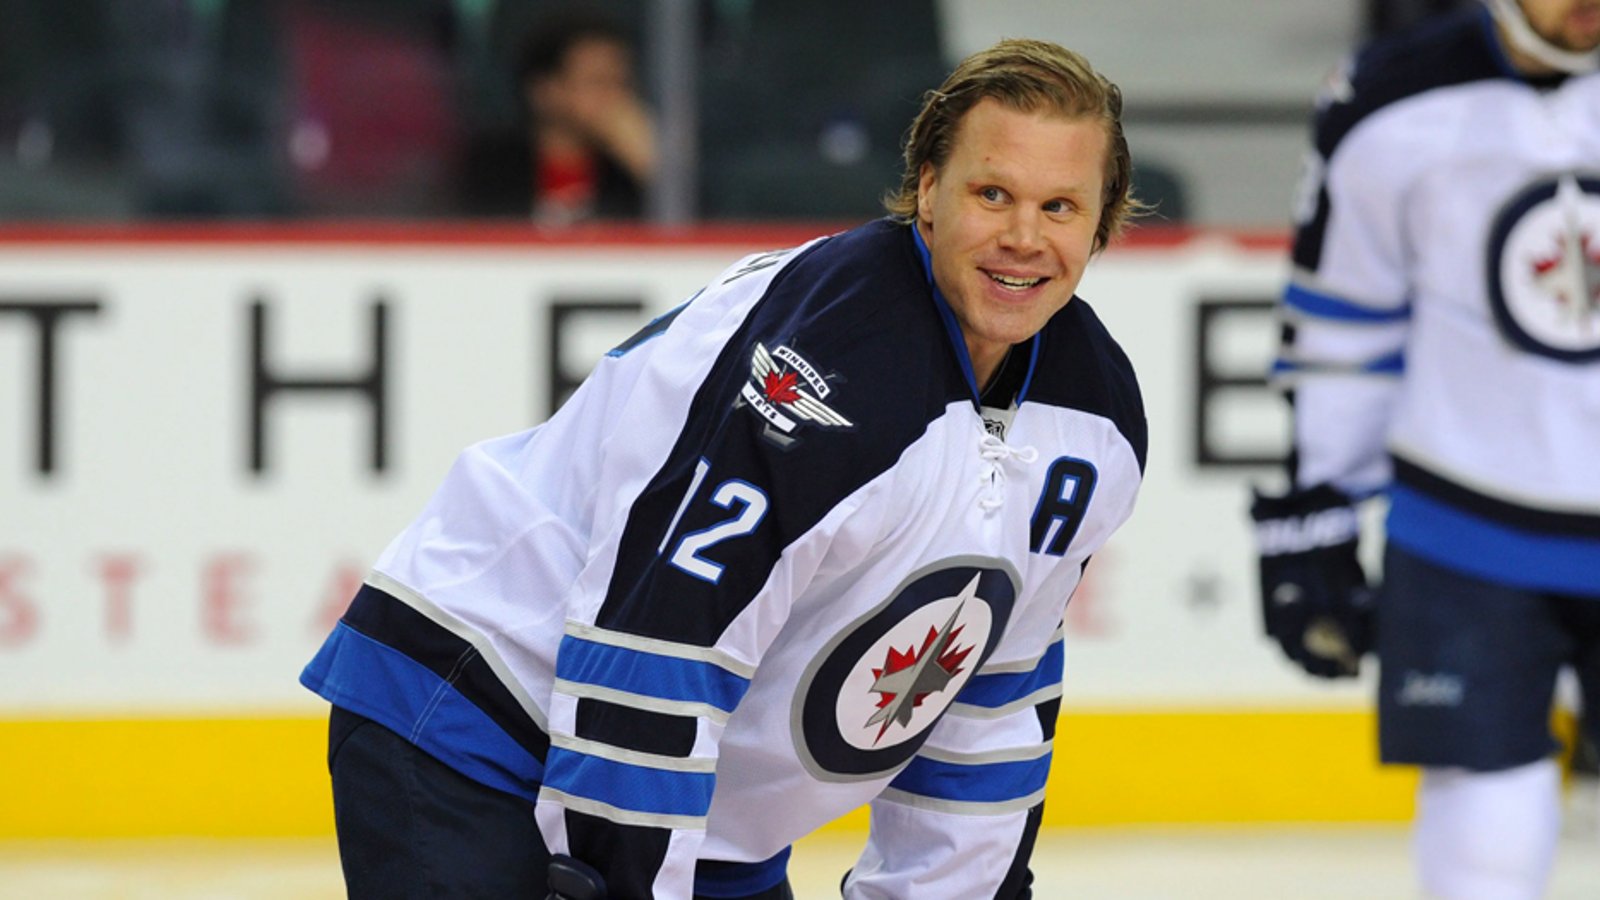 Six years after retirement Olli Jokinen is ready to return to the NHL